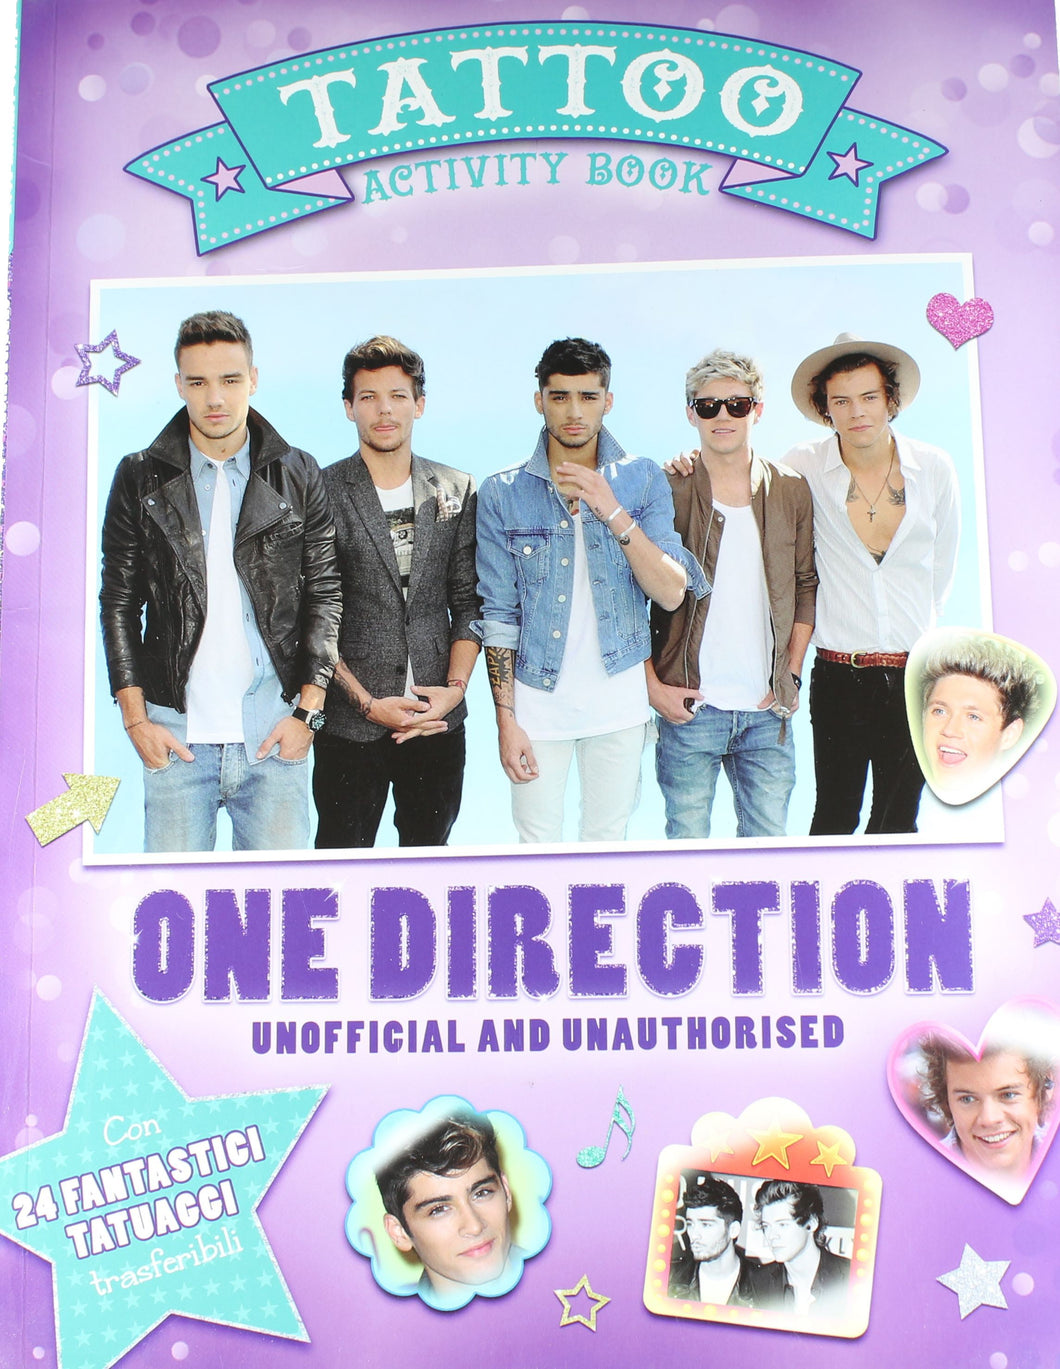 Libro activity book One Direction tattoo